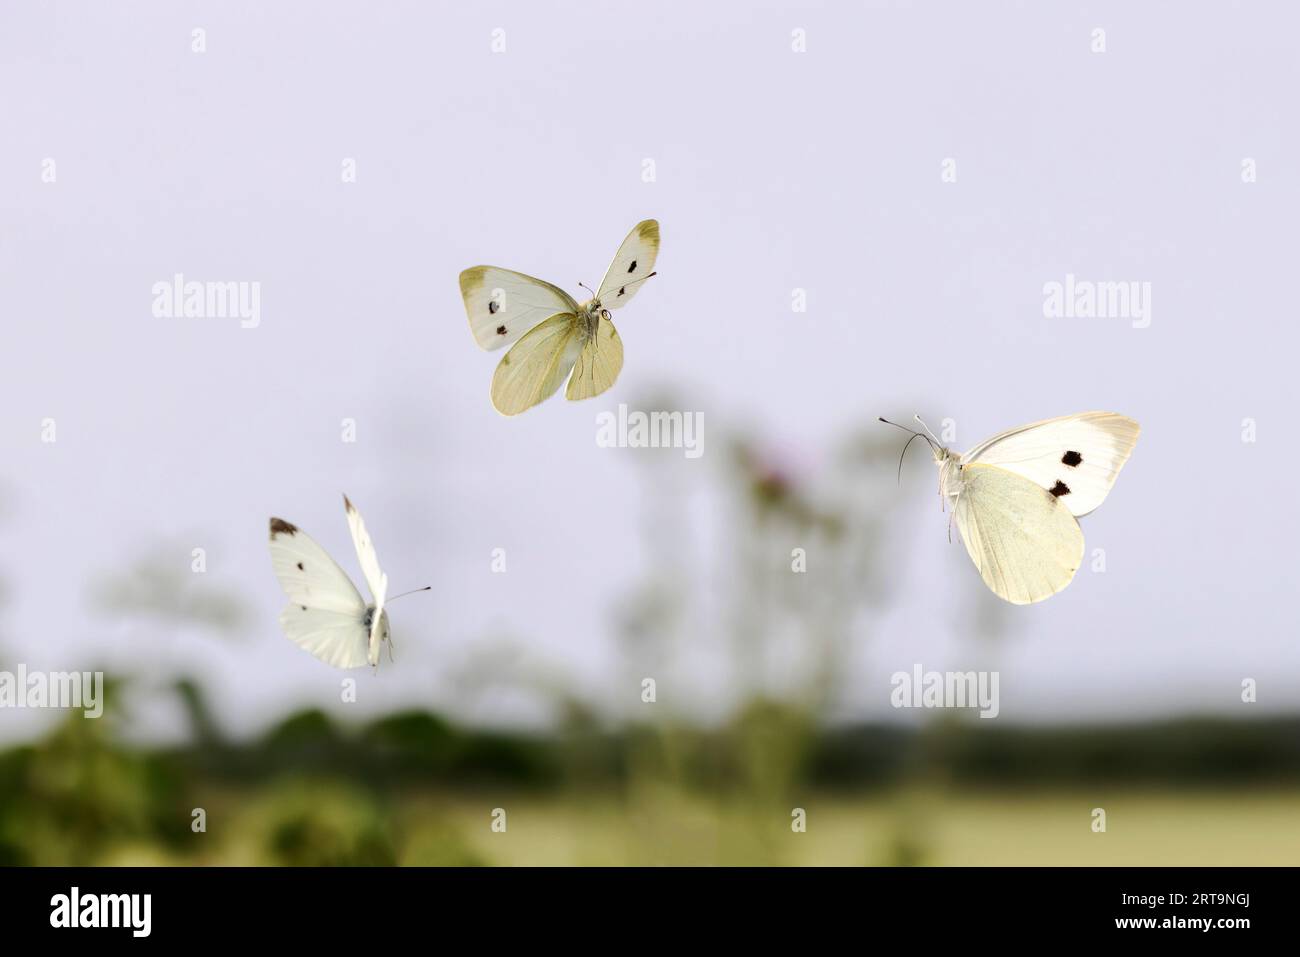 Large White Butterflies In Flight Low Angle View High-Res Stock Photo -  Getty Images